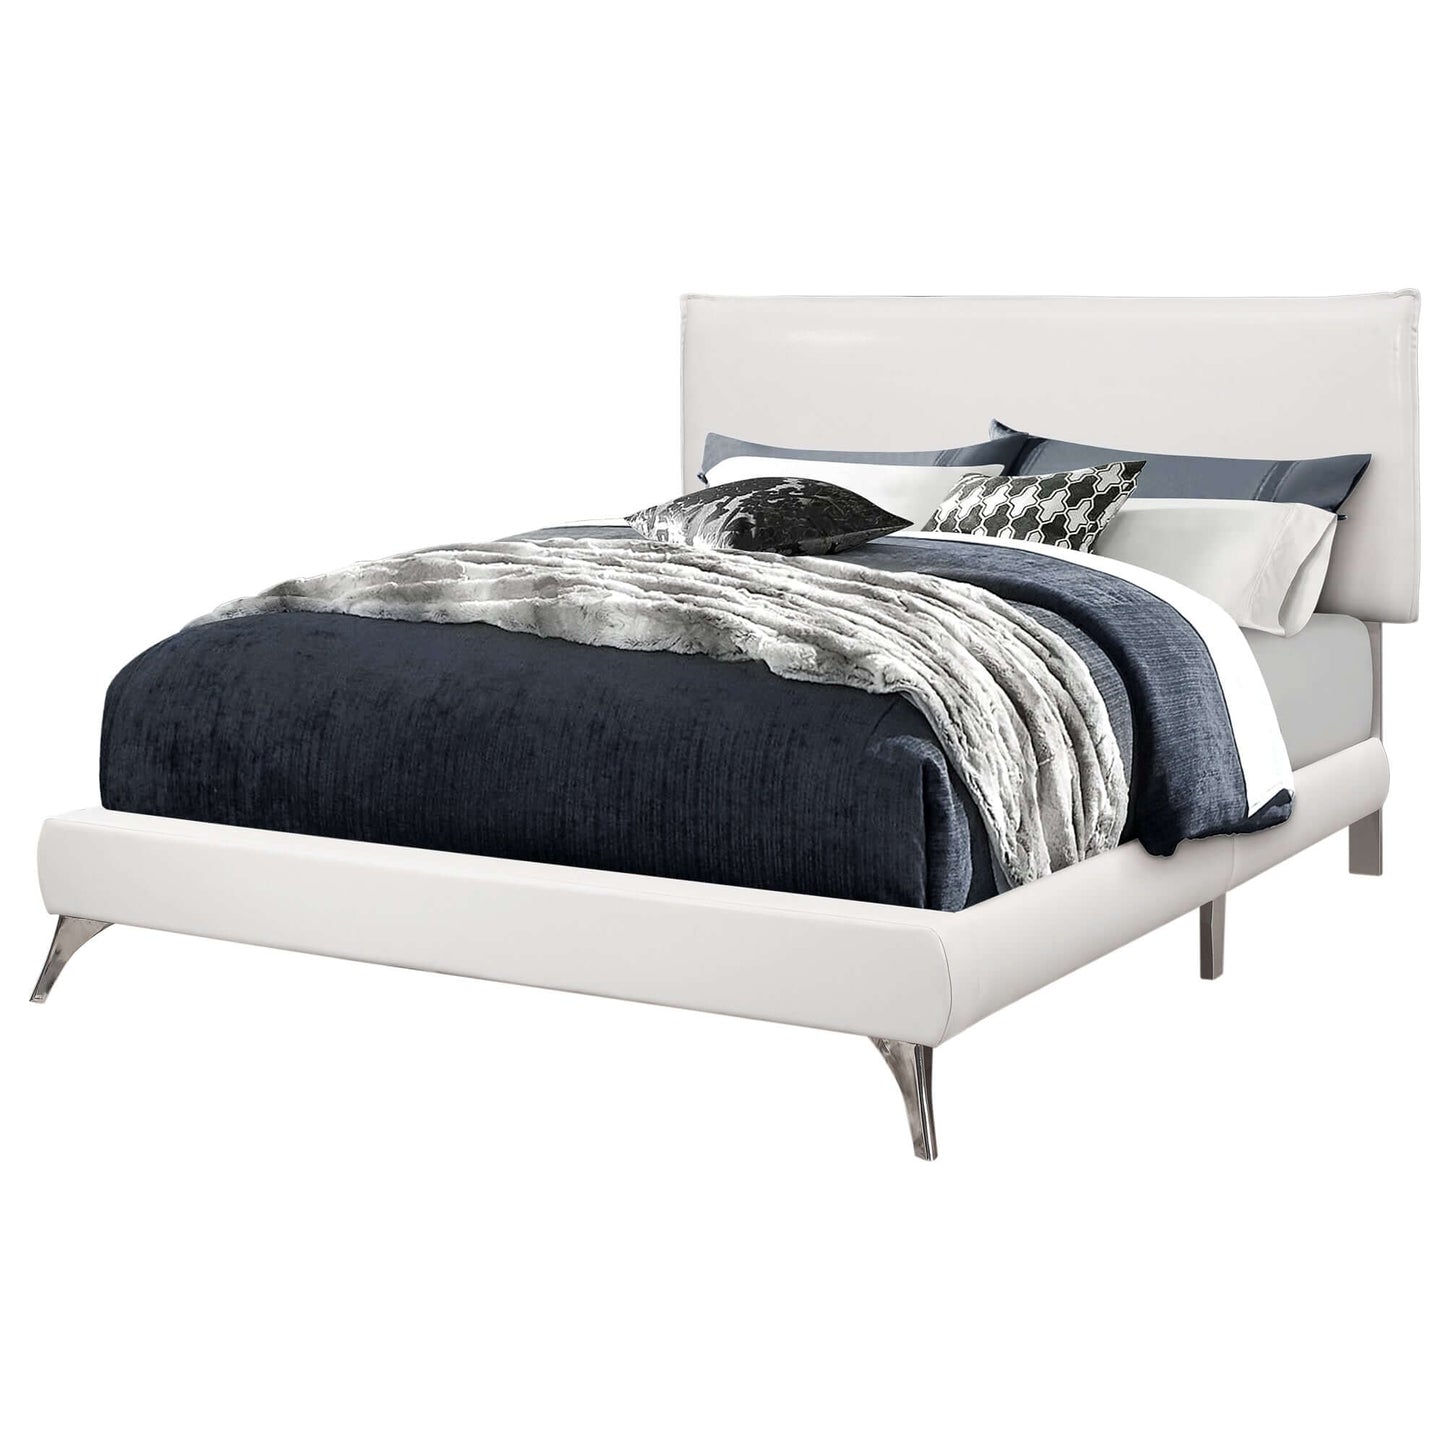 Modern Upholstered Queen Size Bed in White Leather-look with Chrome Legs